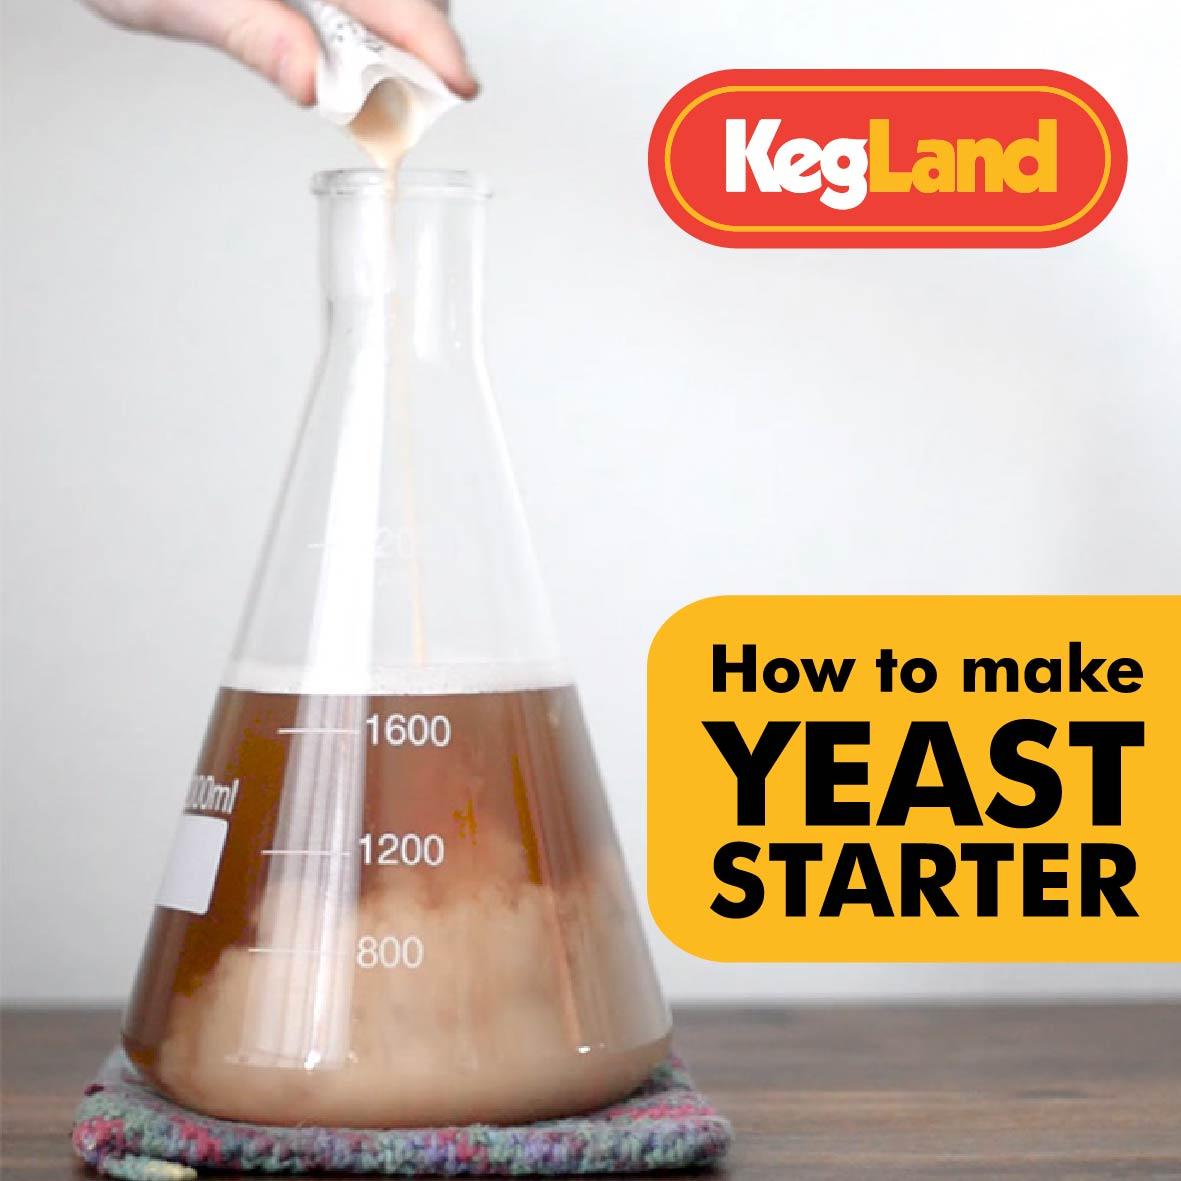 Lets Talk About Yeast And How To Make A Successful Yeast Starter - KegLand